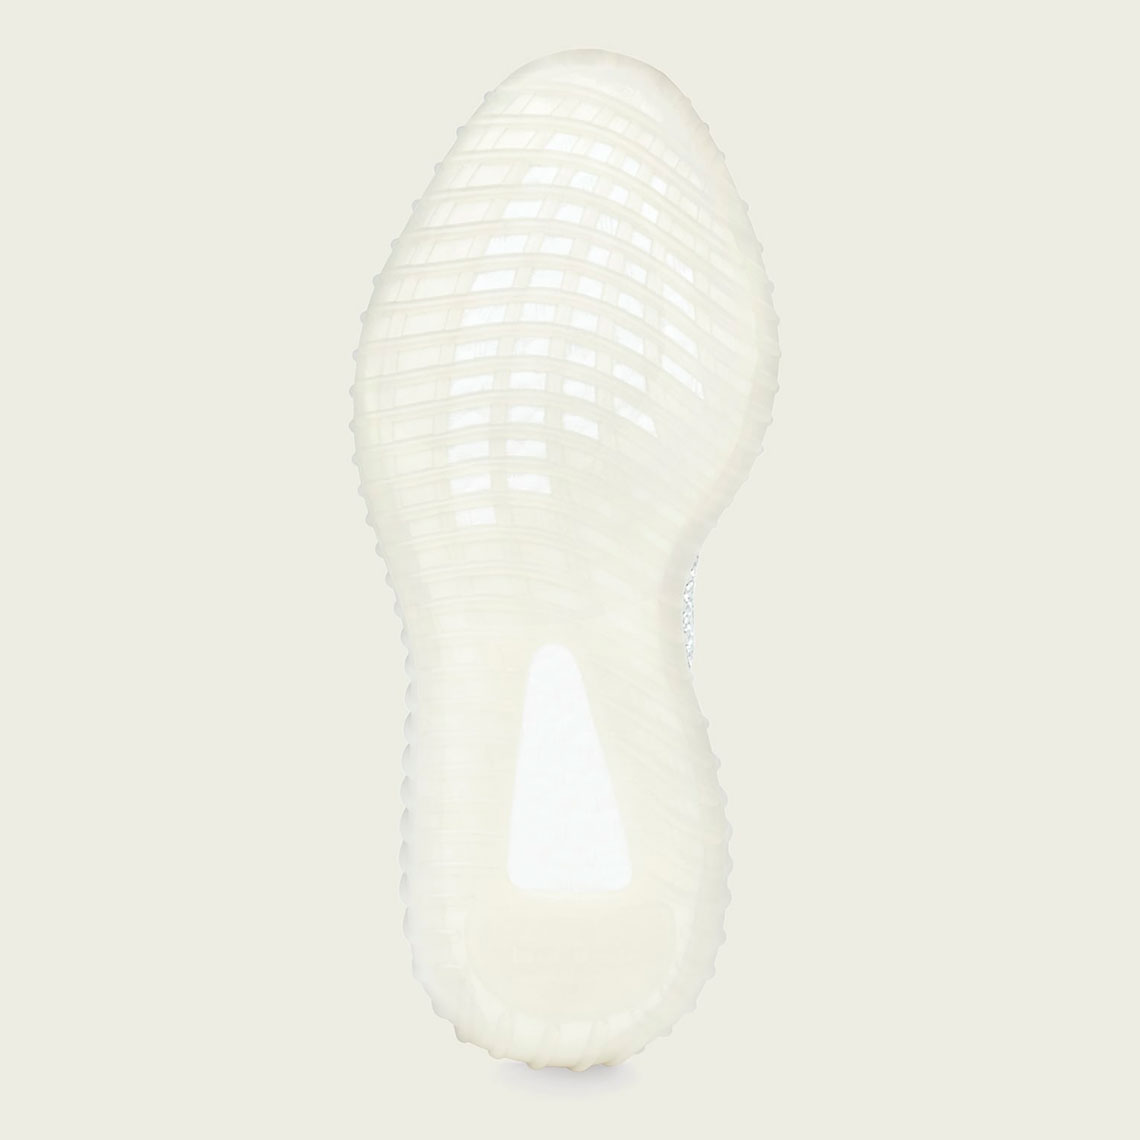 Adidas Yeezy Boost 350 V2 Cloud White Reflective Fw5317 1